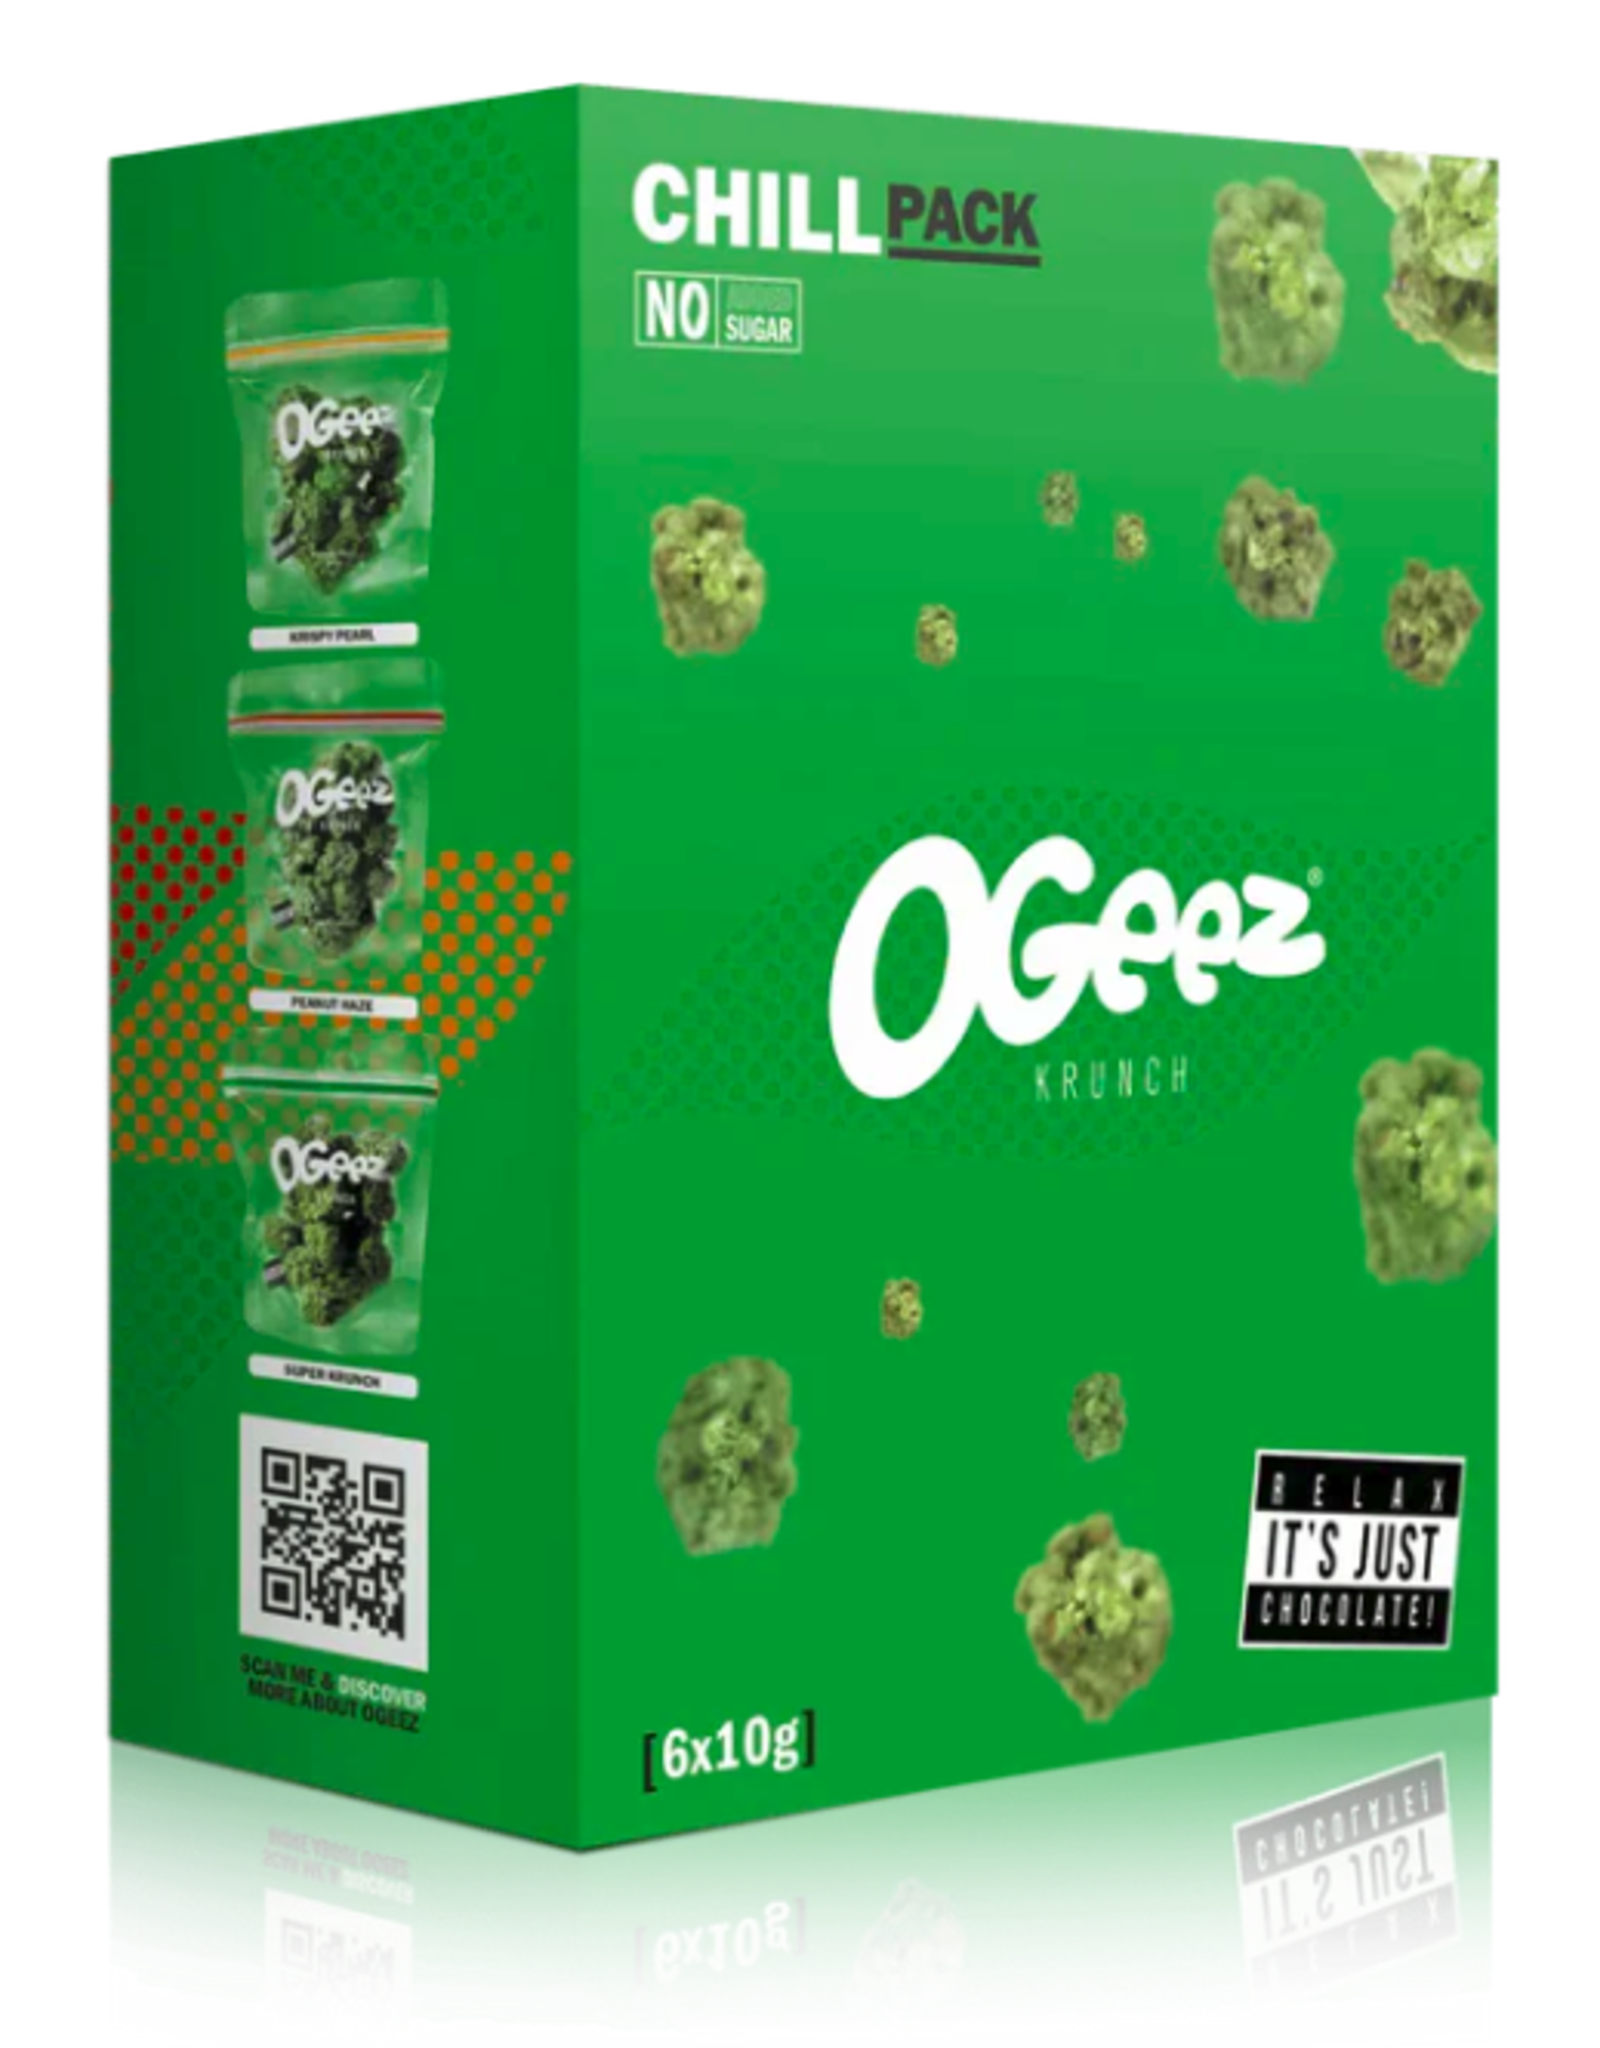 Ogeez chocolate chill pack